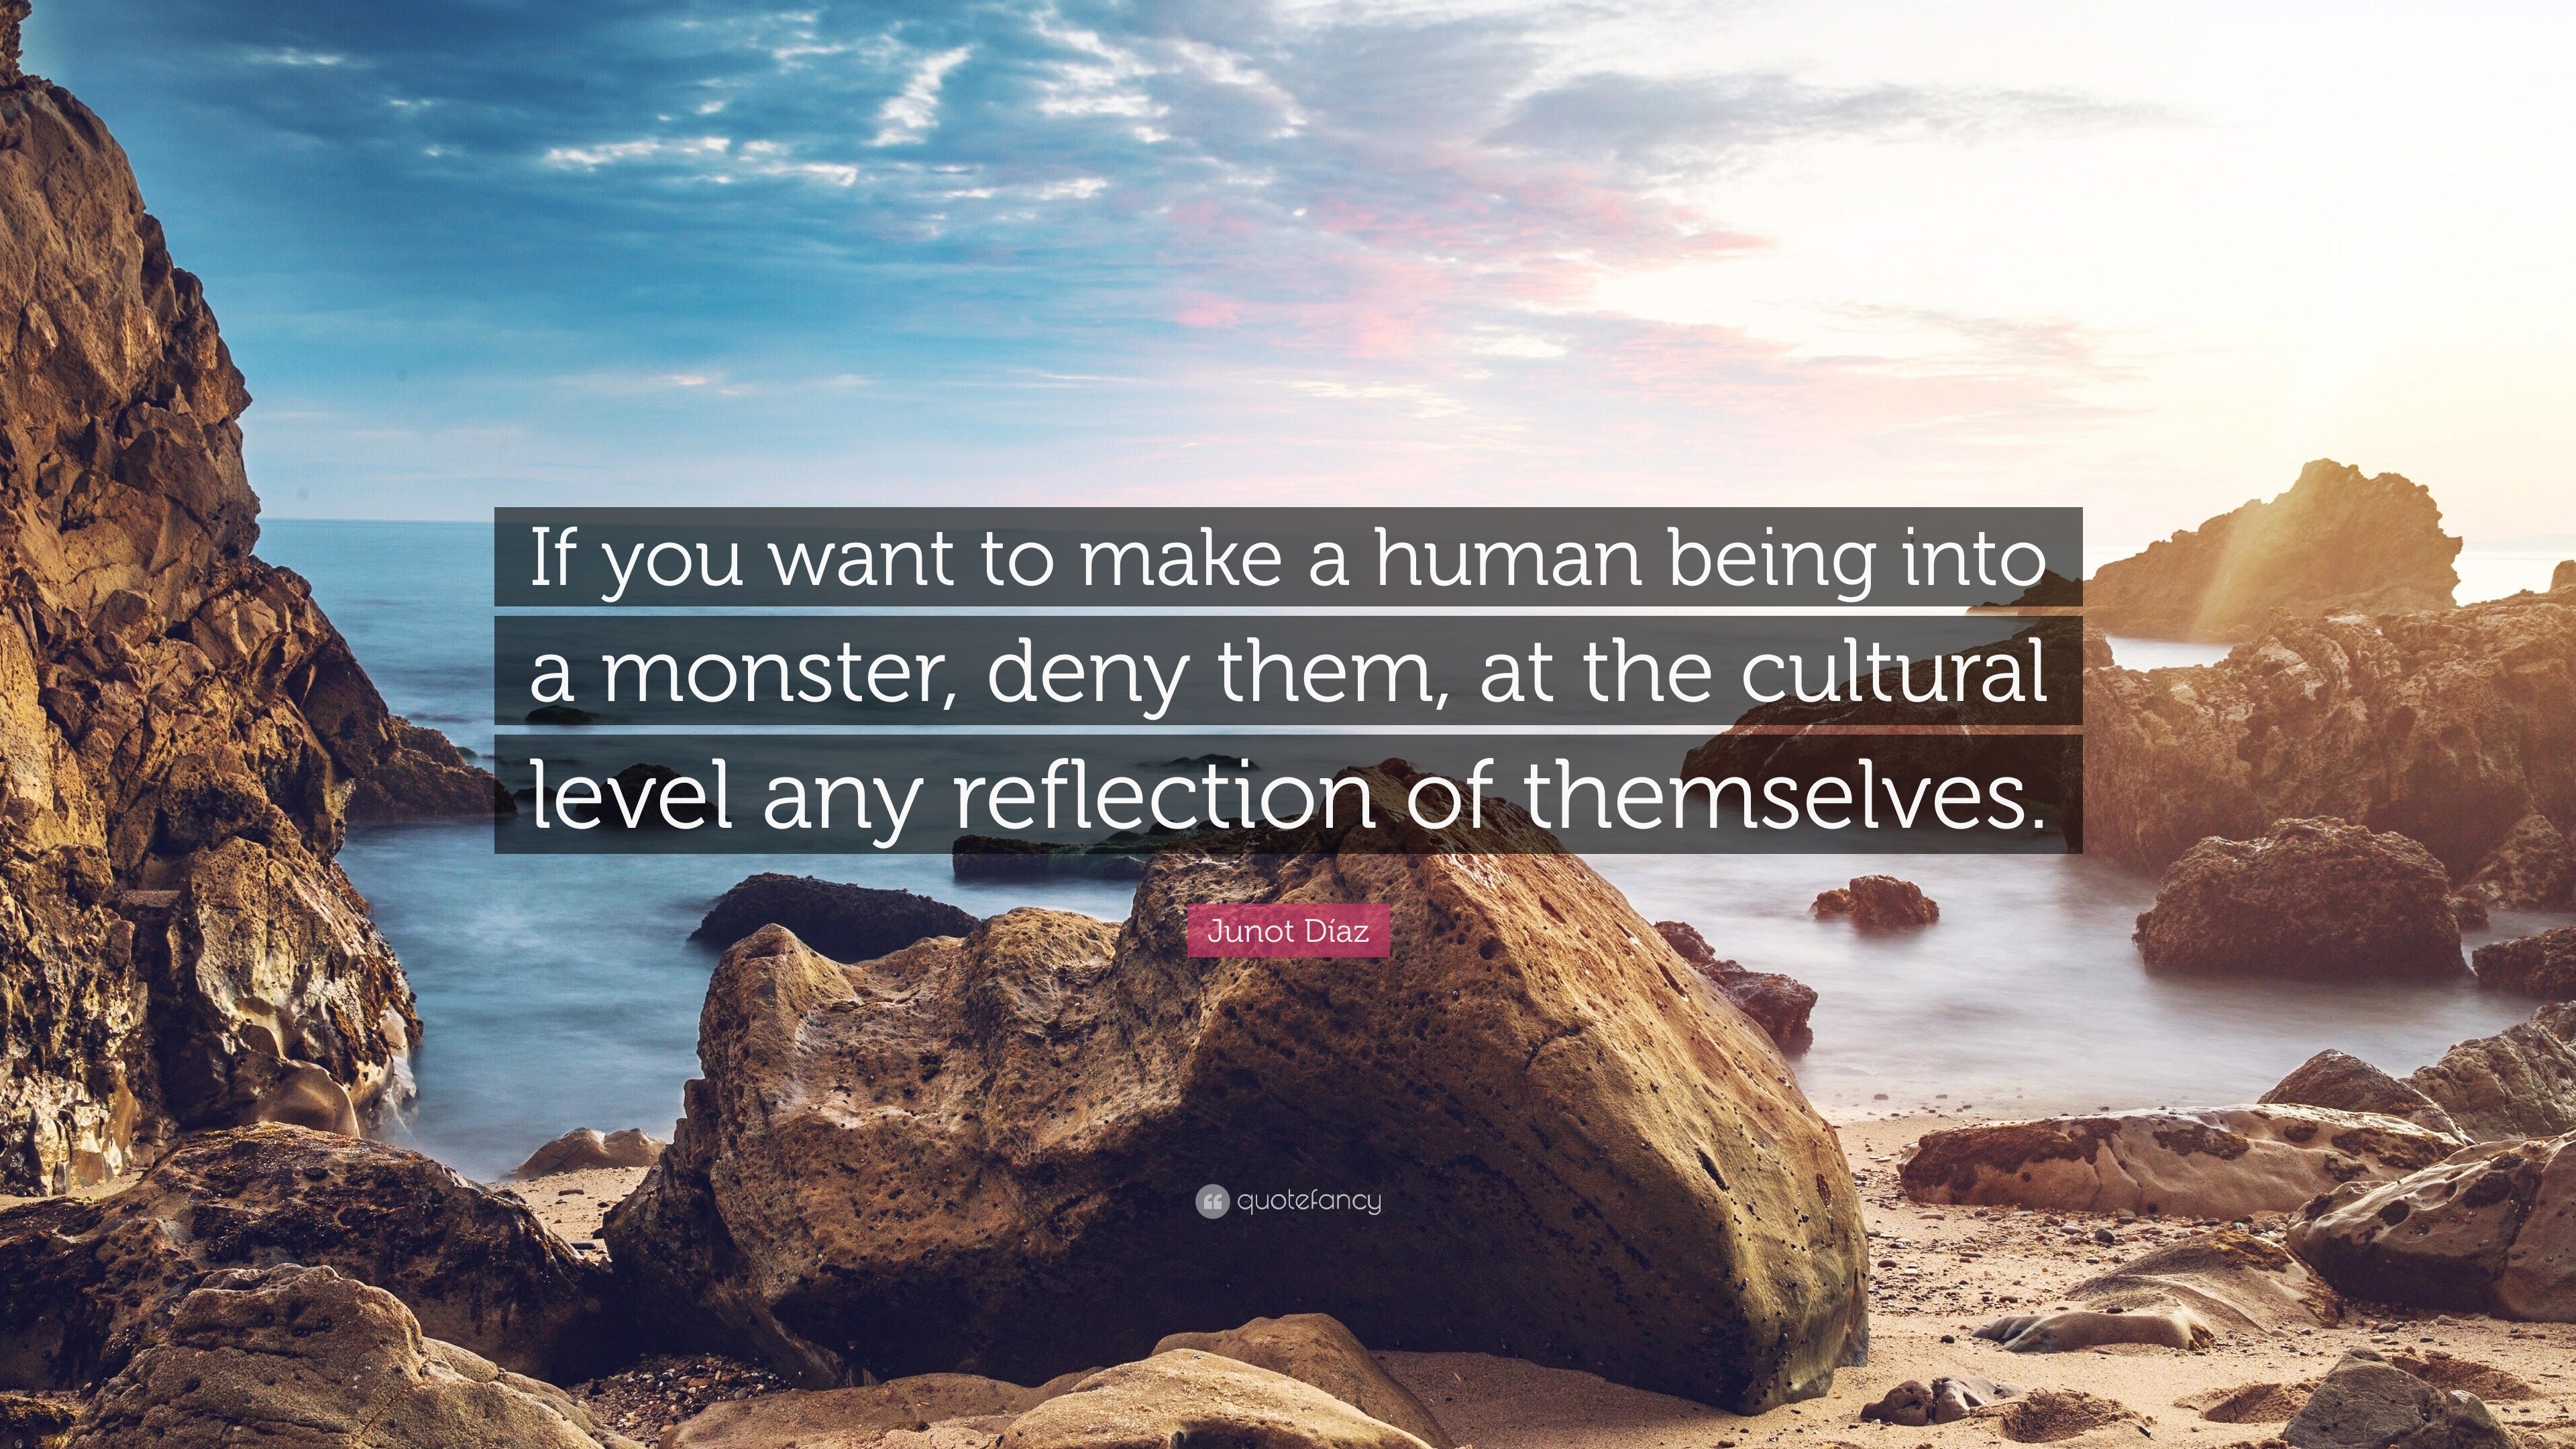 Junot D­az Quote “If you want to make a human being into a monster